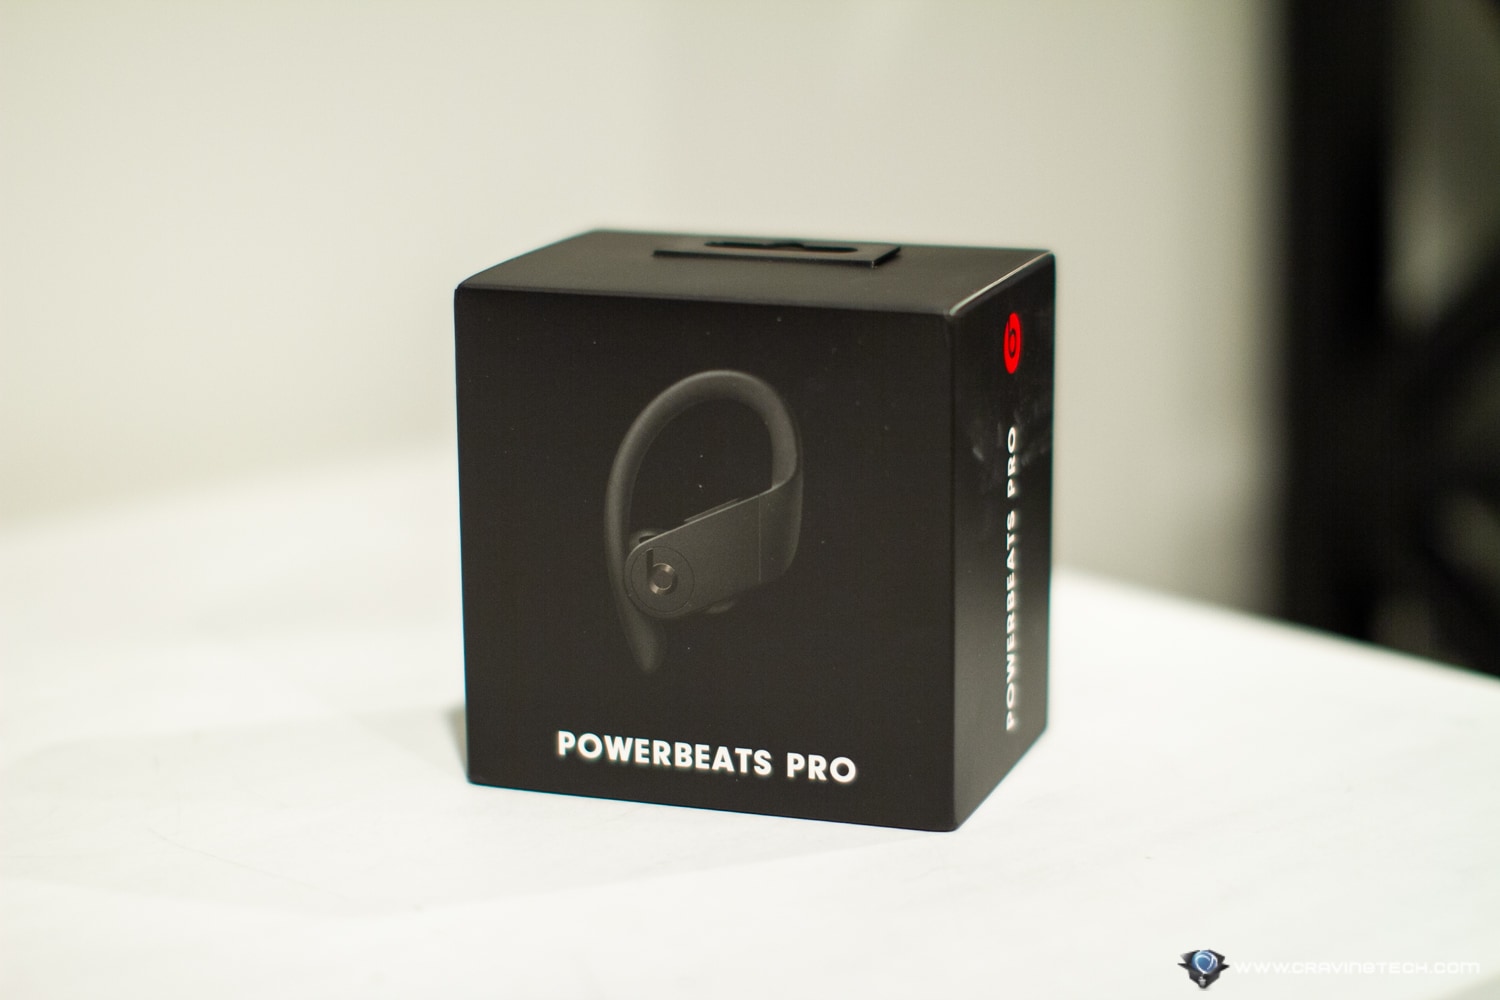 Beasts Powerbeats Pro Review - Packaging